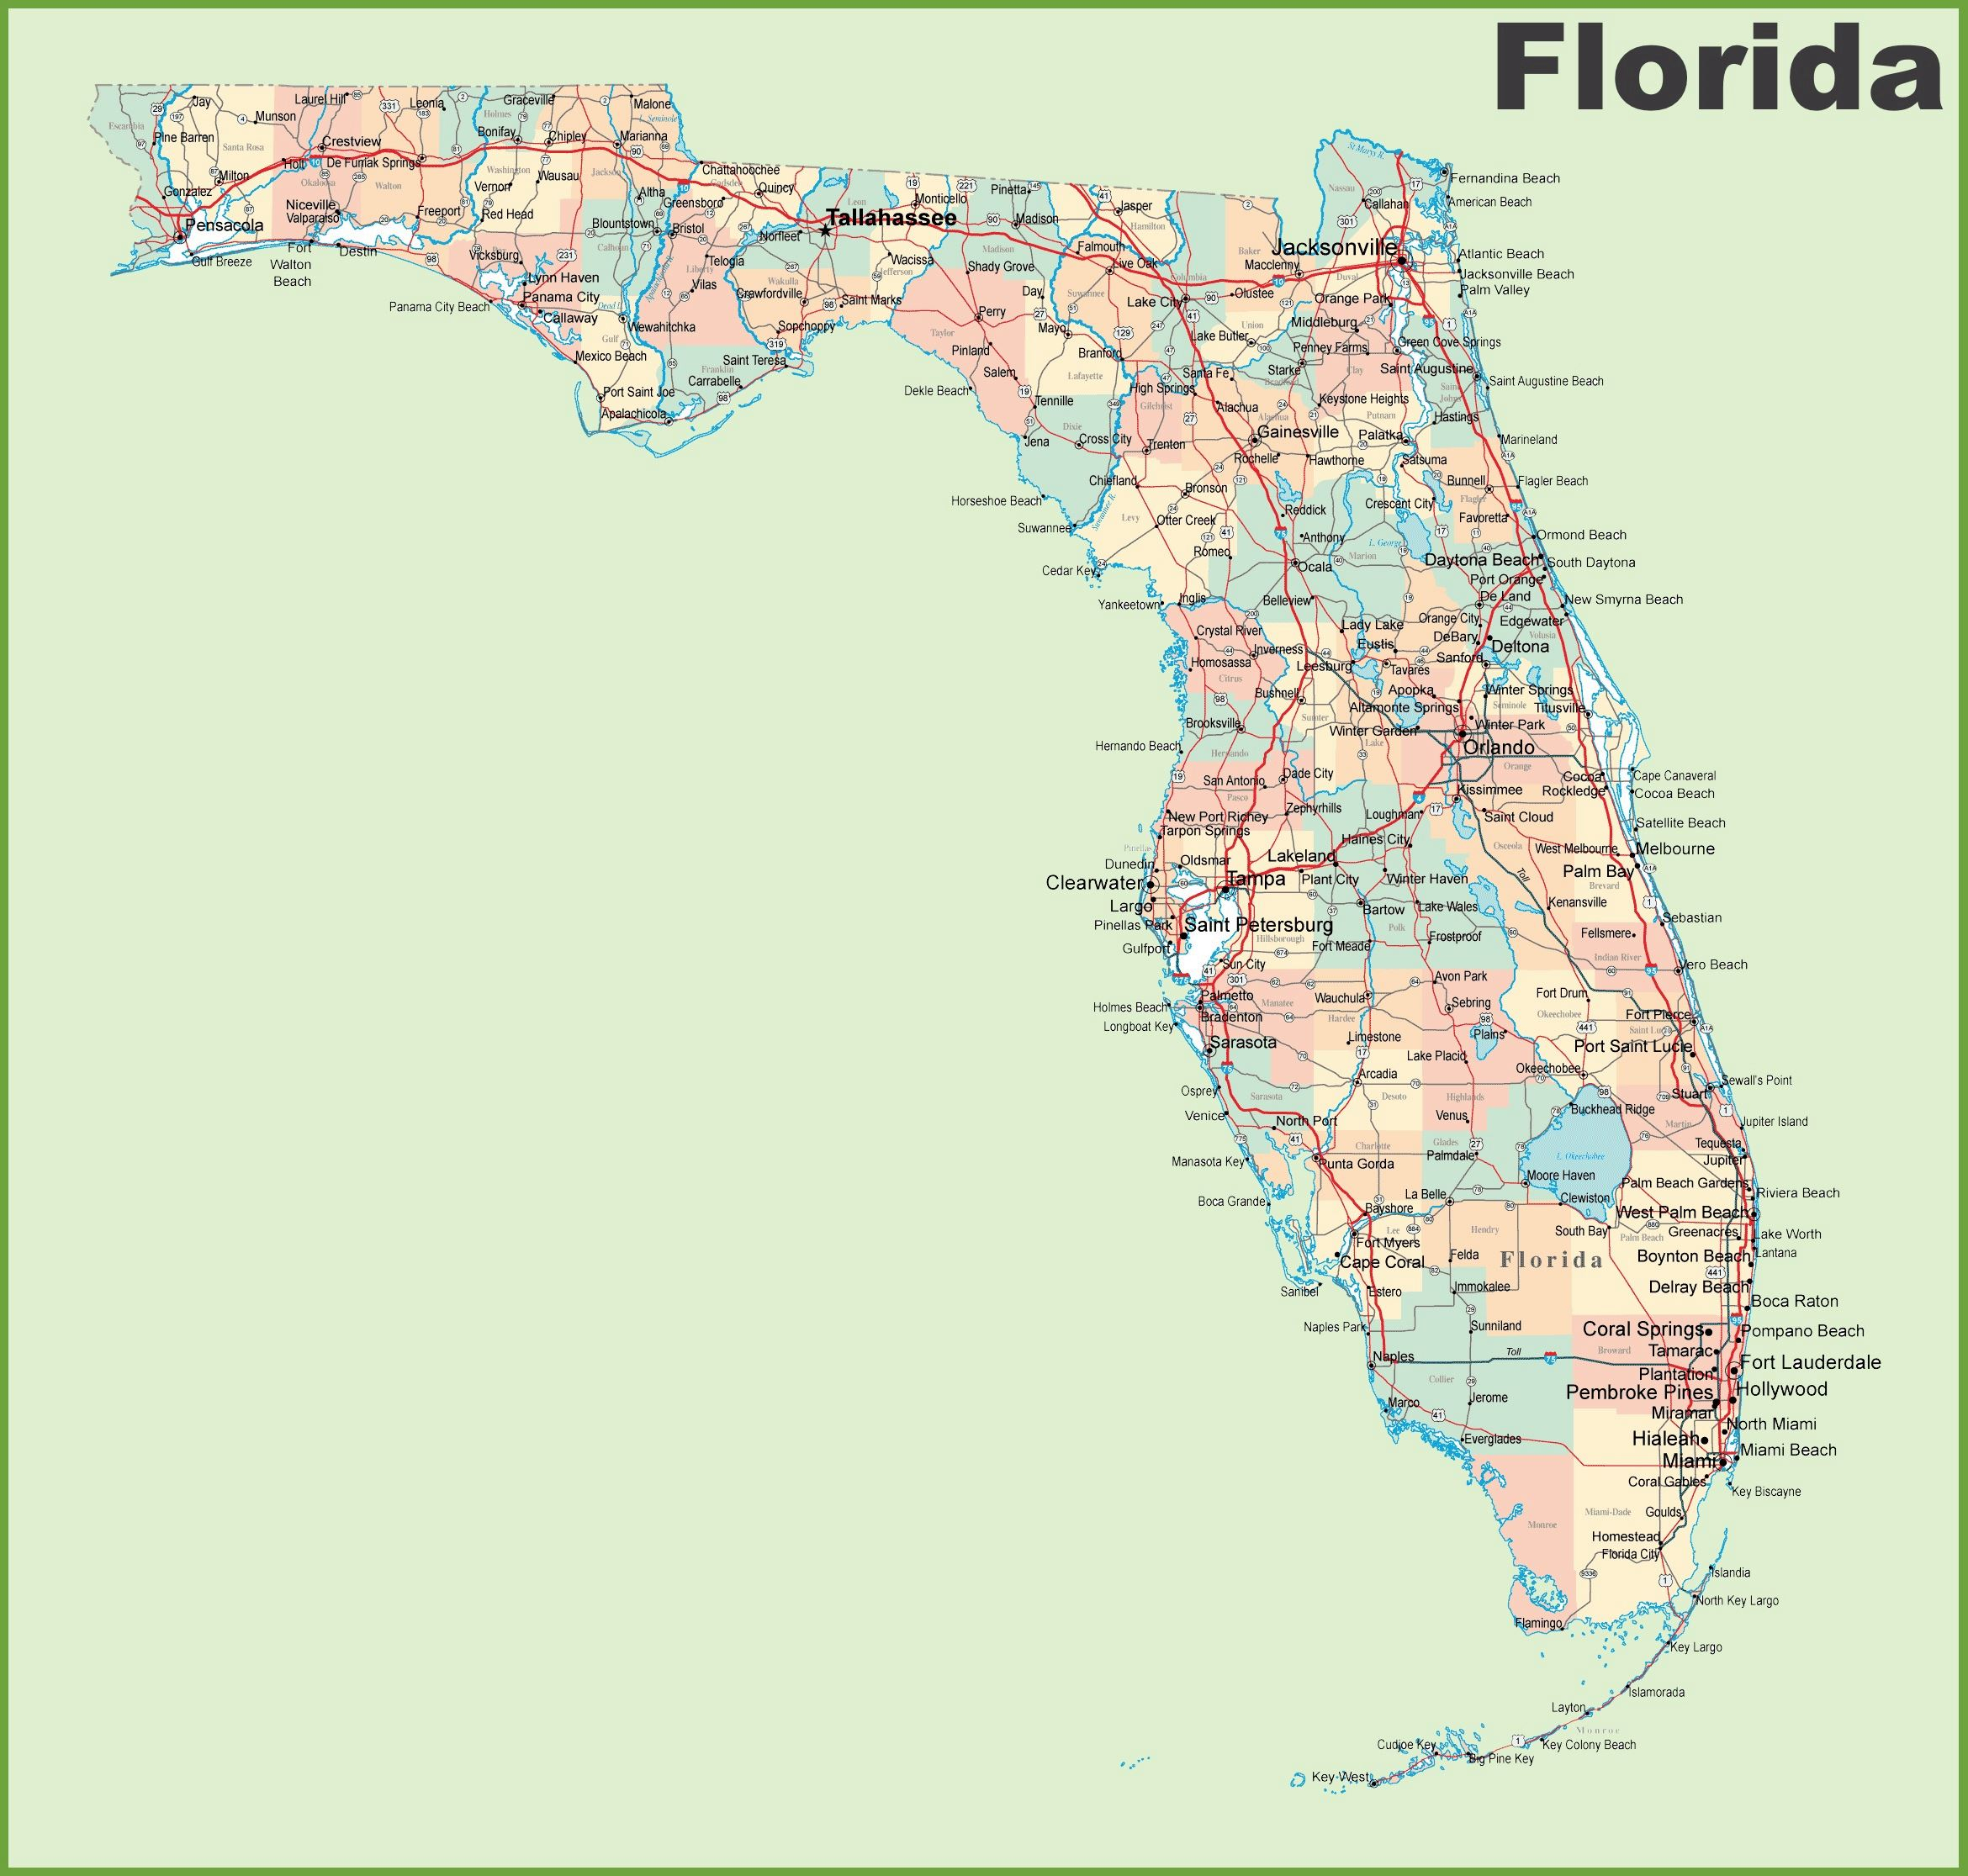 Large Florida Maps For Free Download And Print | High-Resolution And - Florida Gulf Coast Towns Map